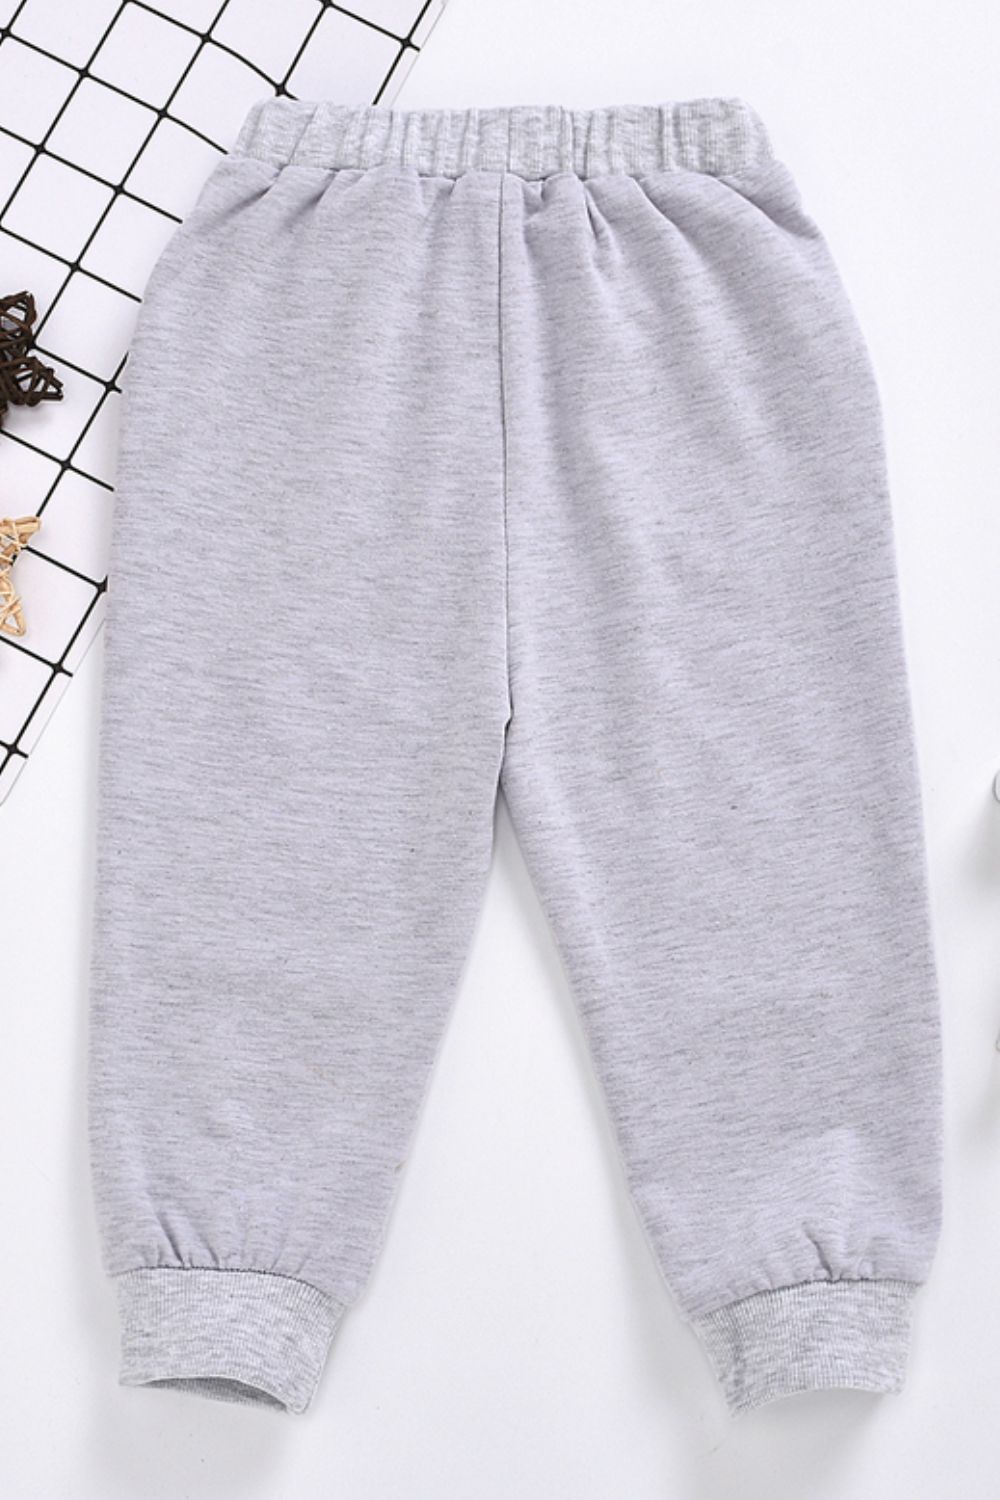 Kids Panda Graphic Joggers with Pockets - toddler's pants at TFC&H Co.